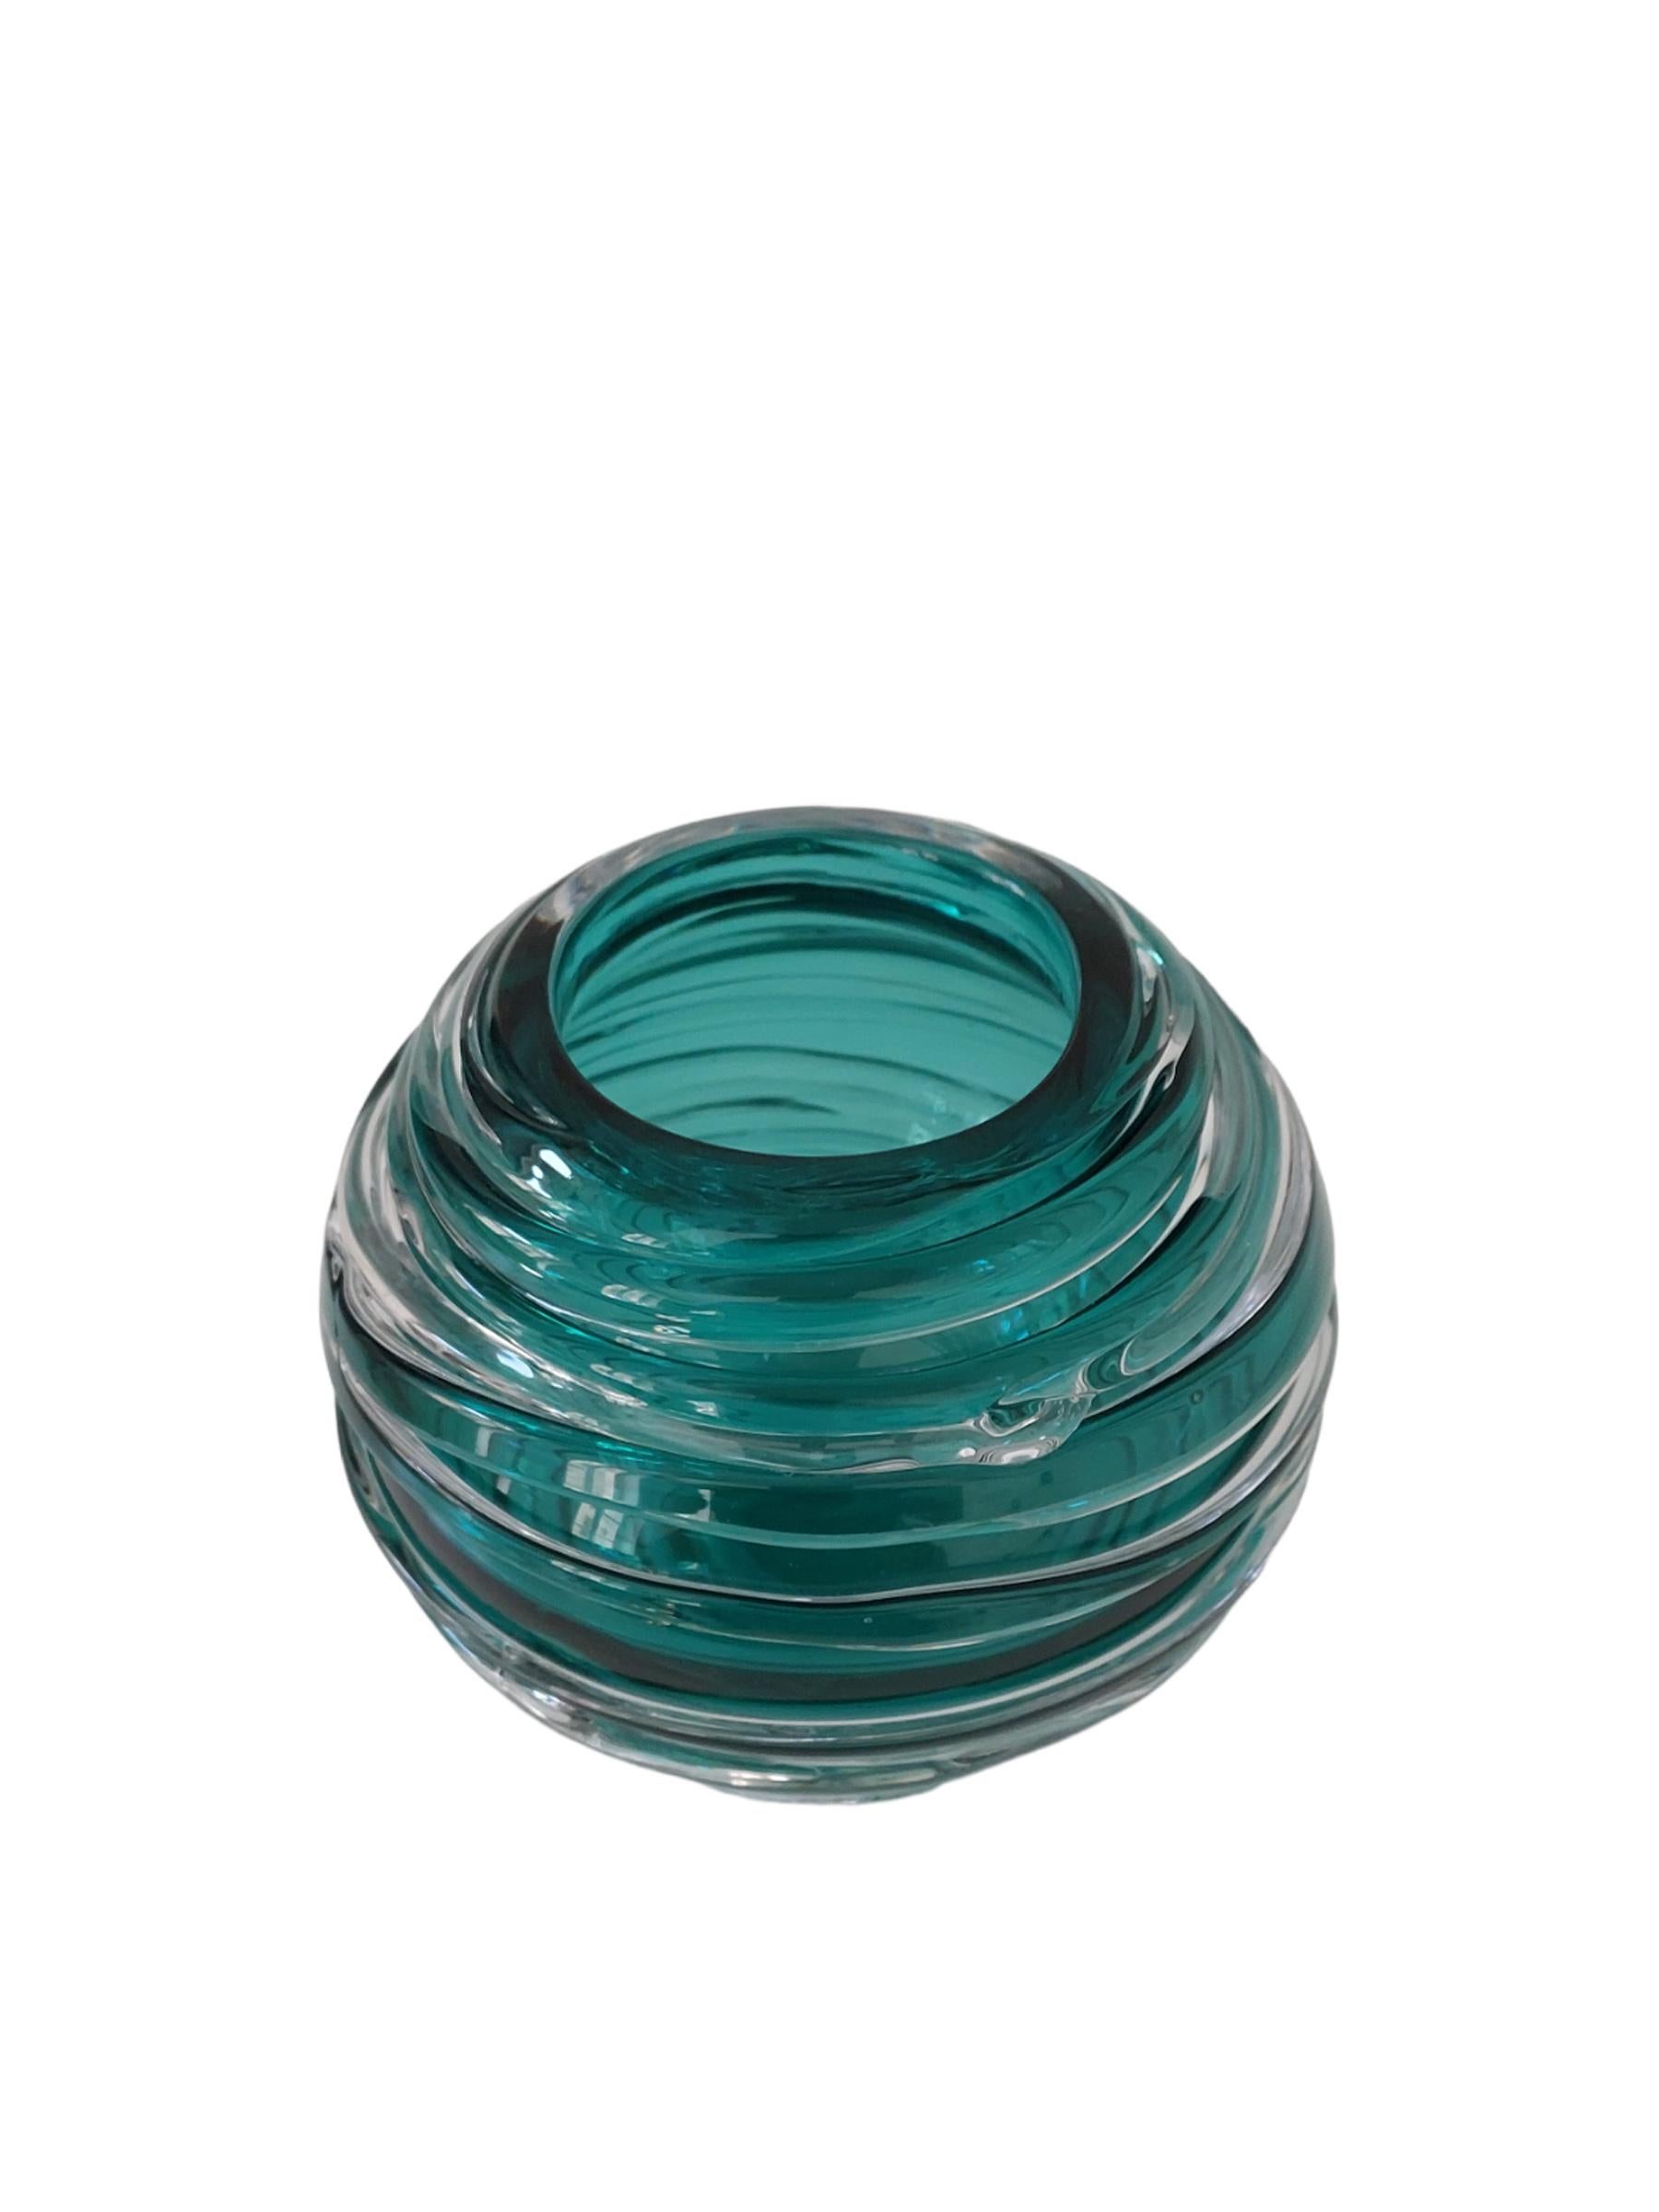 Mouth blown glass vase completely hand-crafted. Tourmaline color with ribbed details.
16 cm / 6 1/4' diameter perfect size for everyday flowers and even beautiful when empty as a sculpture that will enhance the exquisite design detail.
Mouth opening